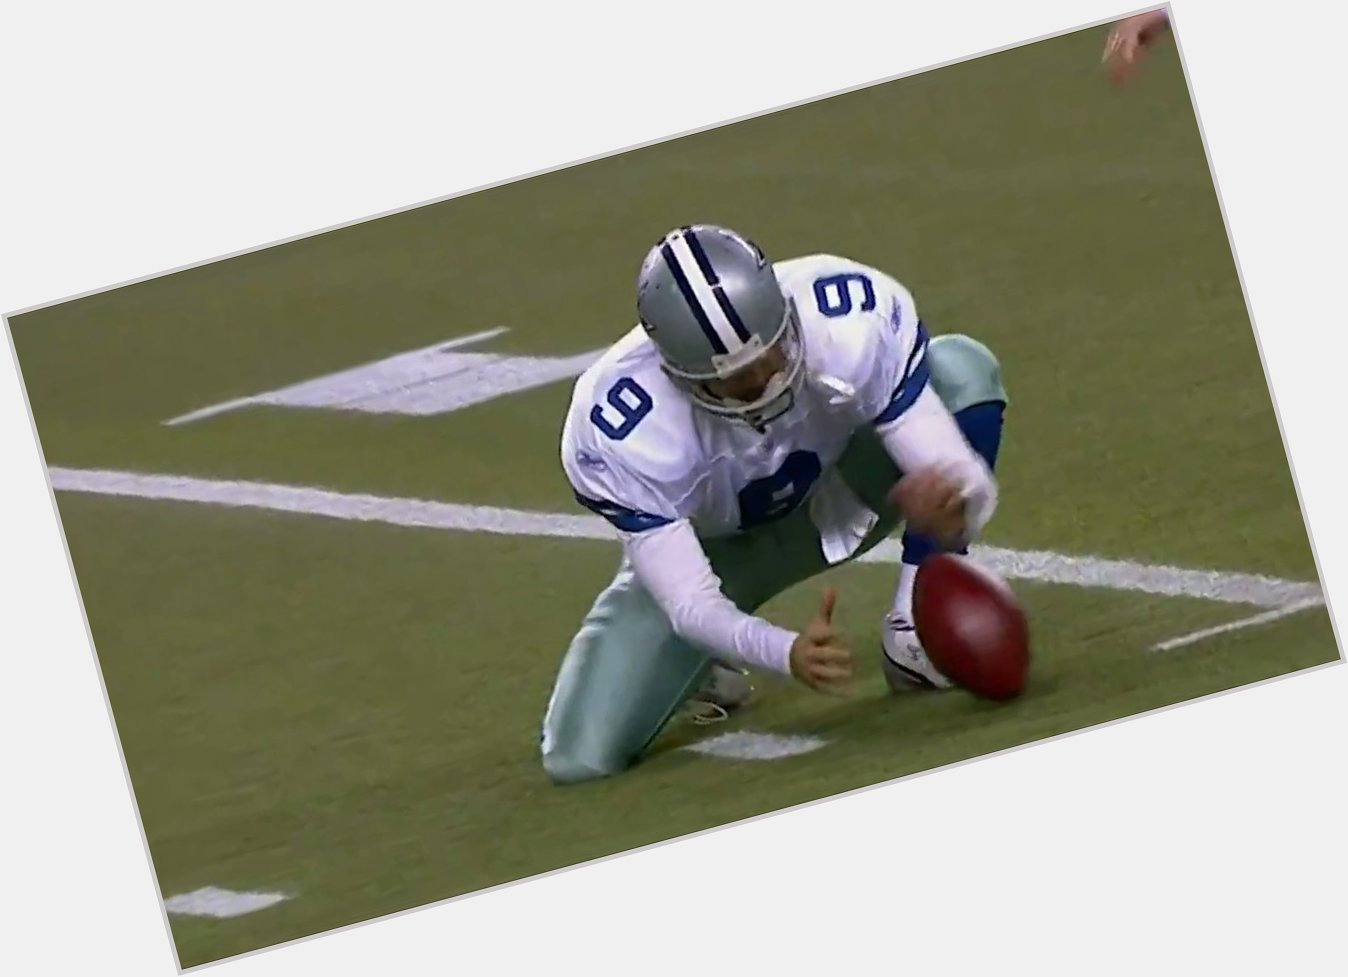 Happy birthday Tony Romo. The Seattle Seahawks have a present for you! 